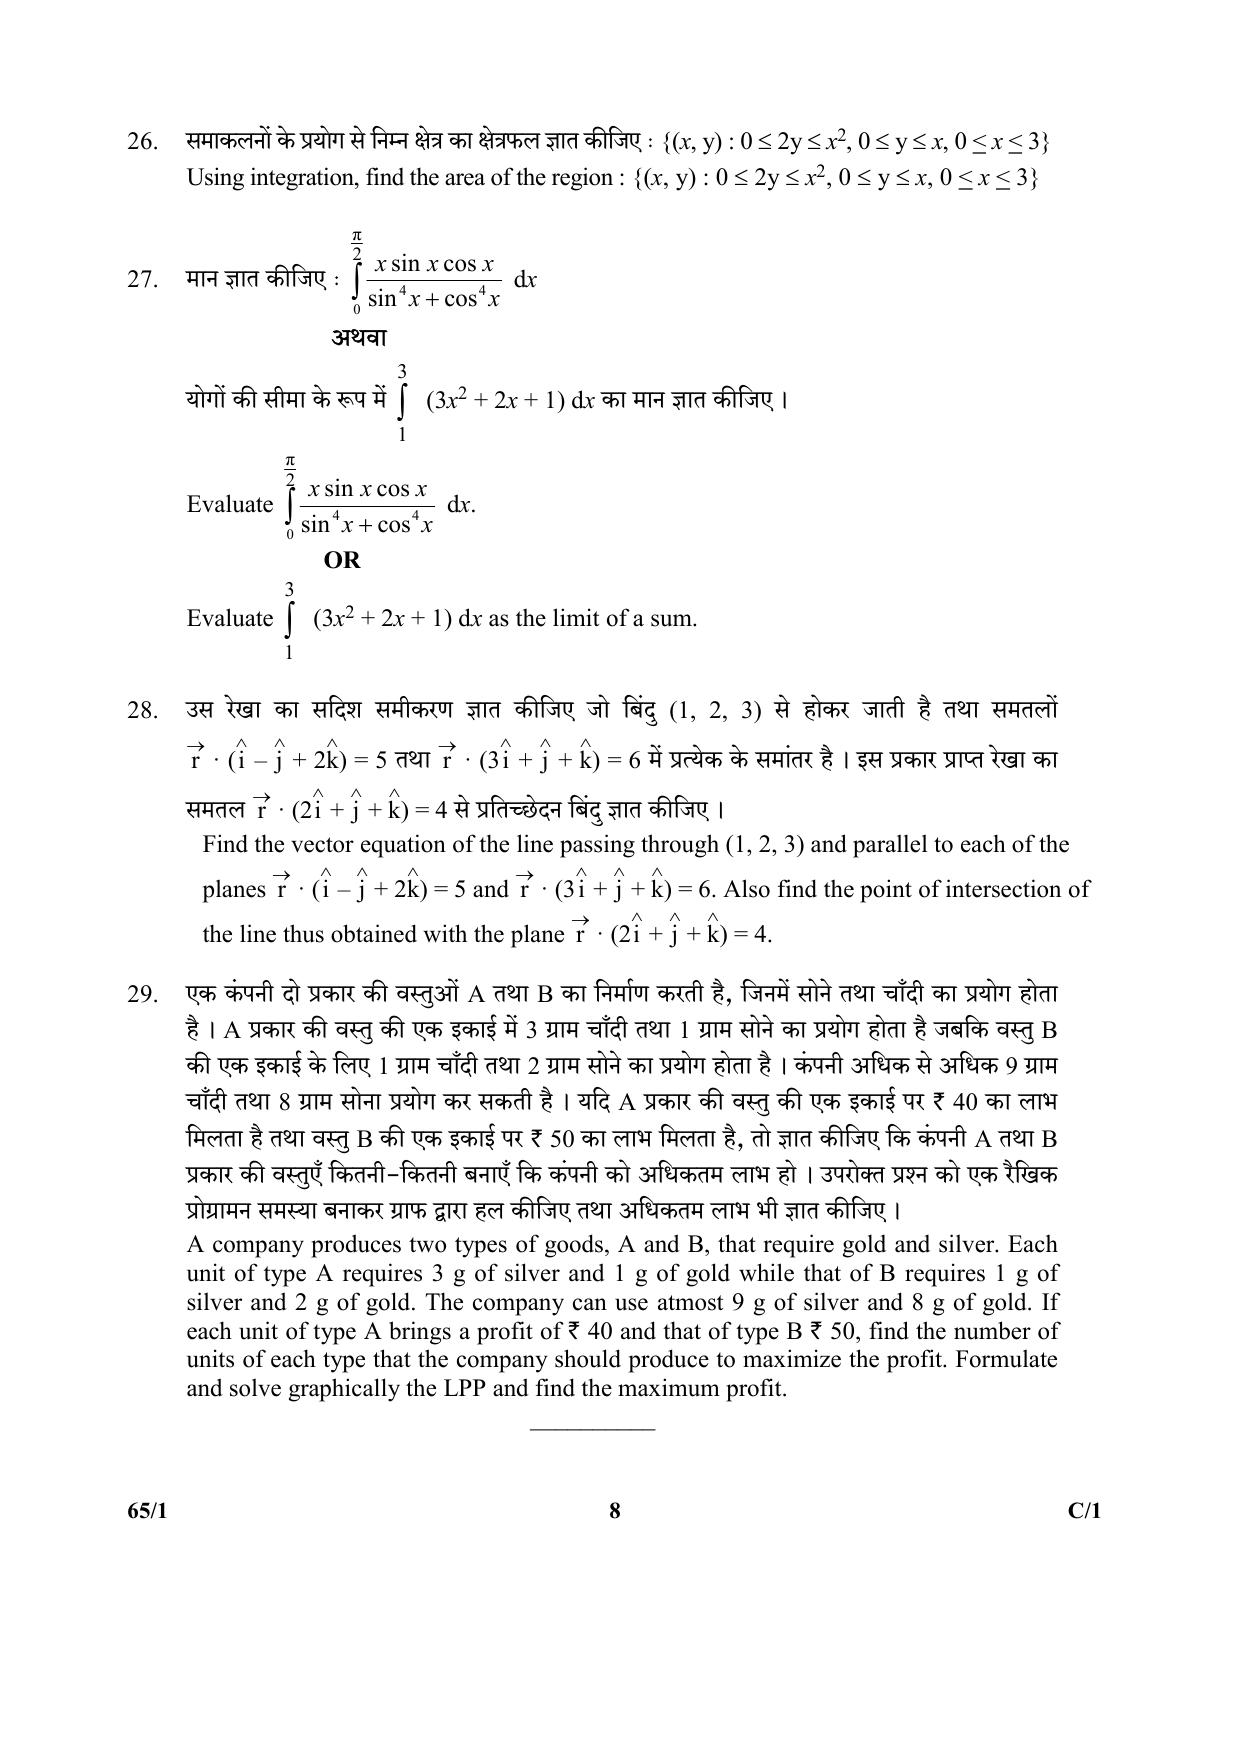 CBSE Class 12 65-1 (Mathematics) 2018 Compartment Question Paper - Page 8